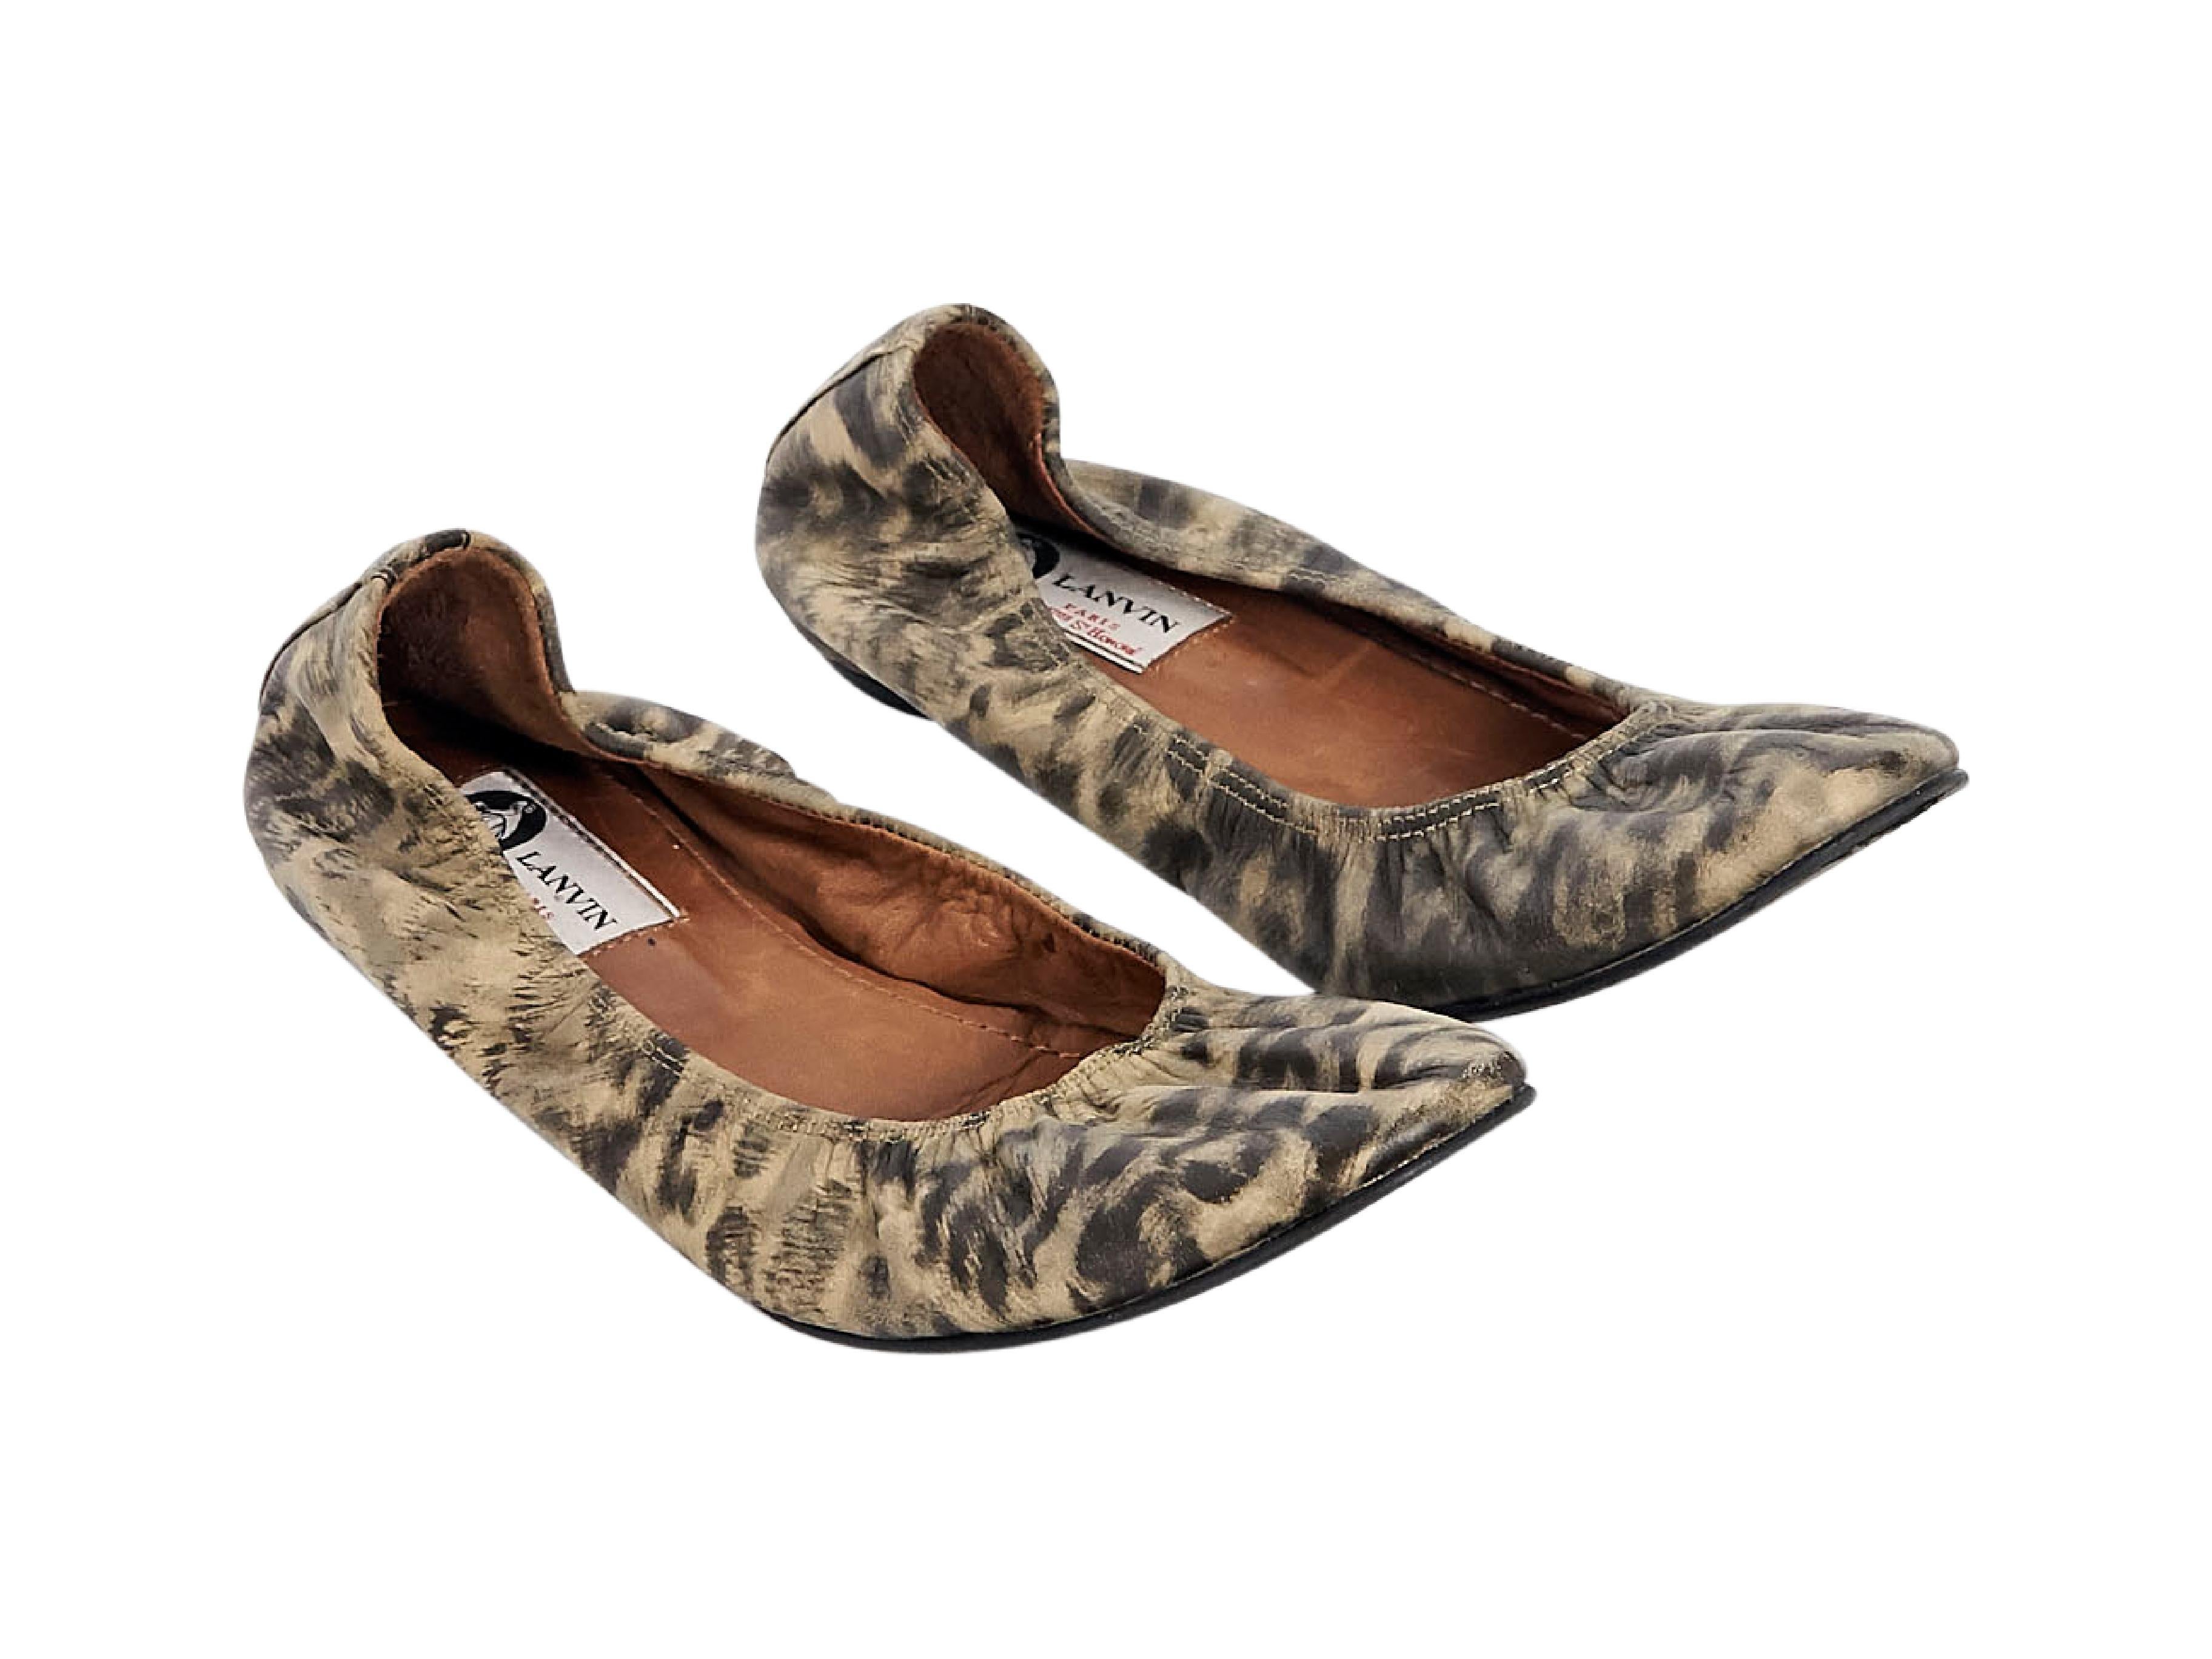 Product details:  Multicolor leopard-print leather ballet flats by Lanvin.  Elasticized top line.  Round toe.  Slip-on style. 
Condition: Pre-owned. Very good.  
